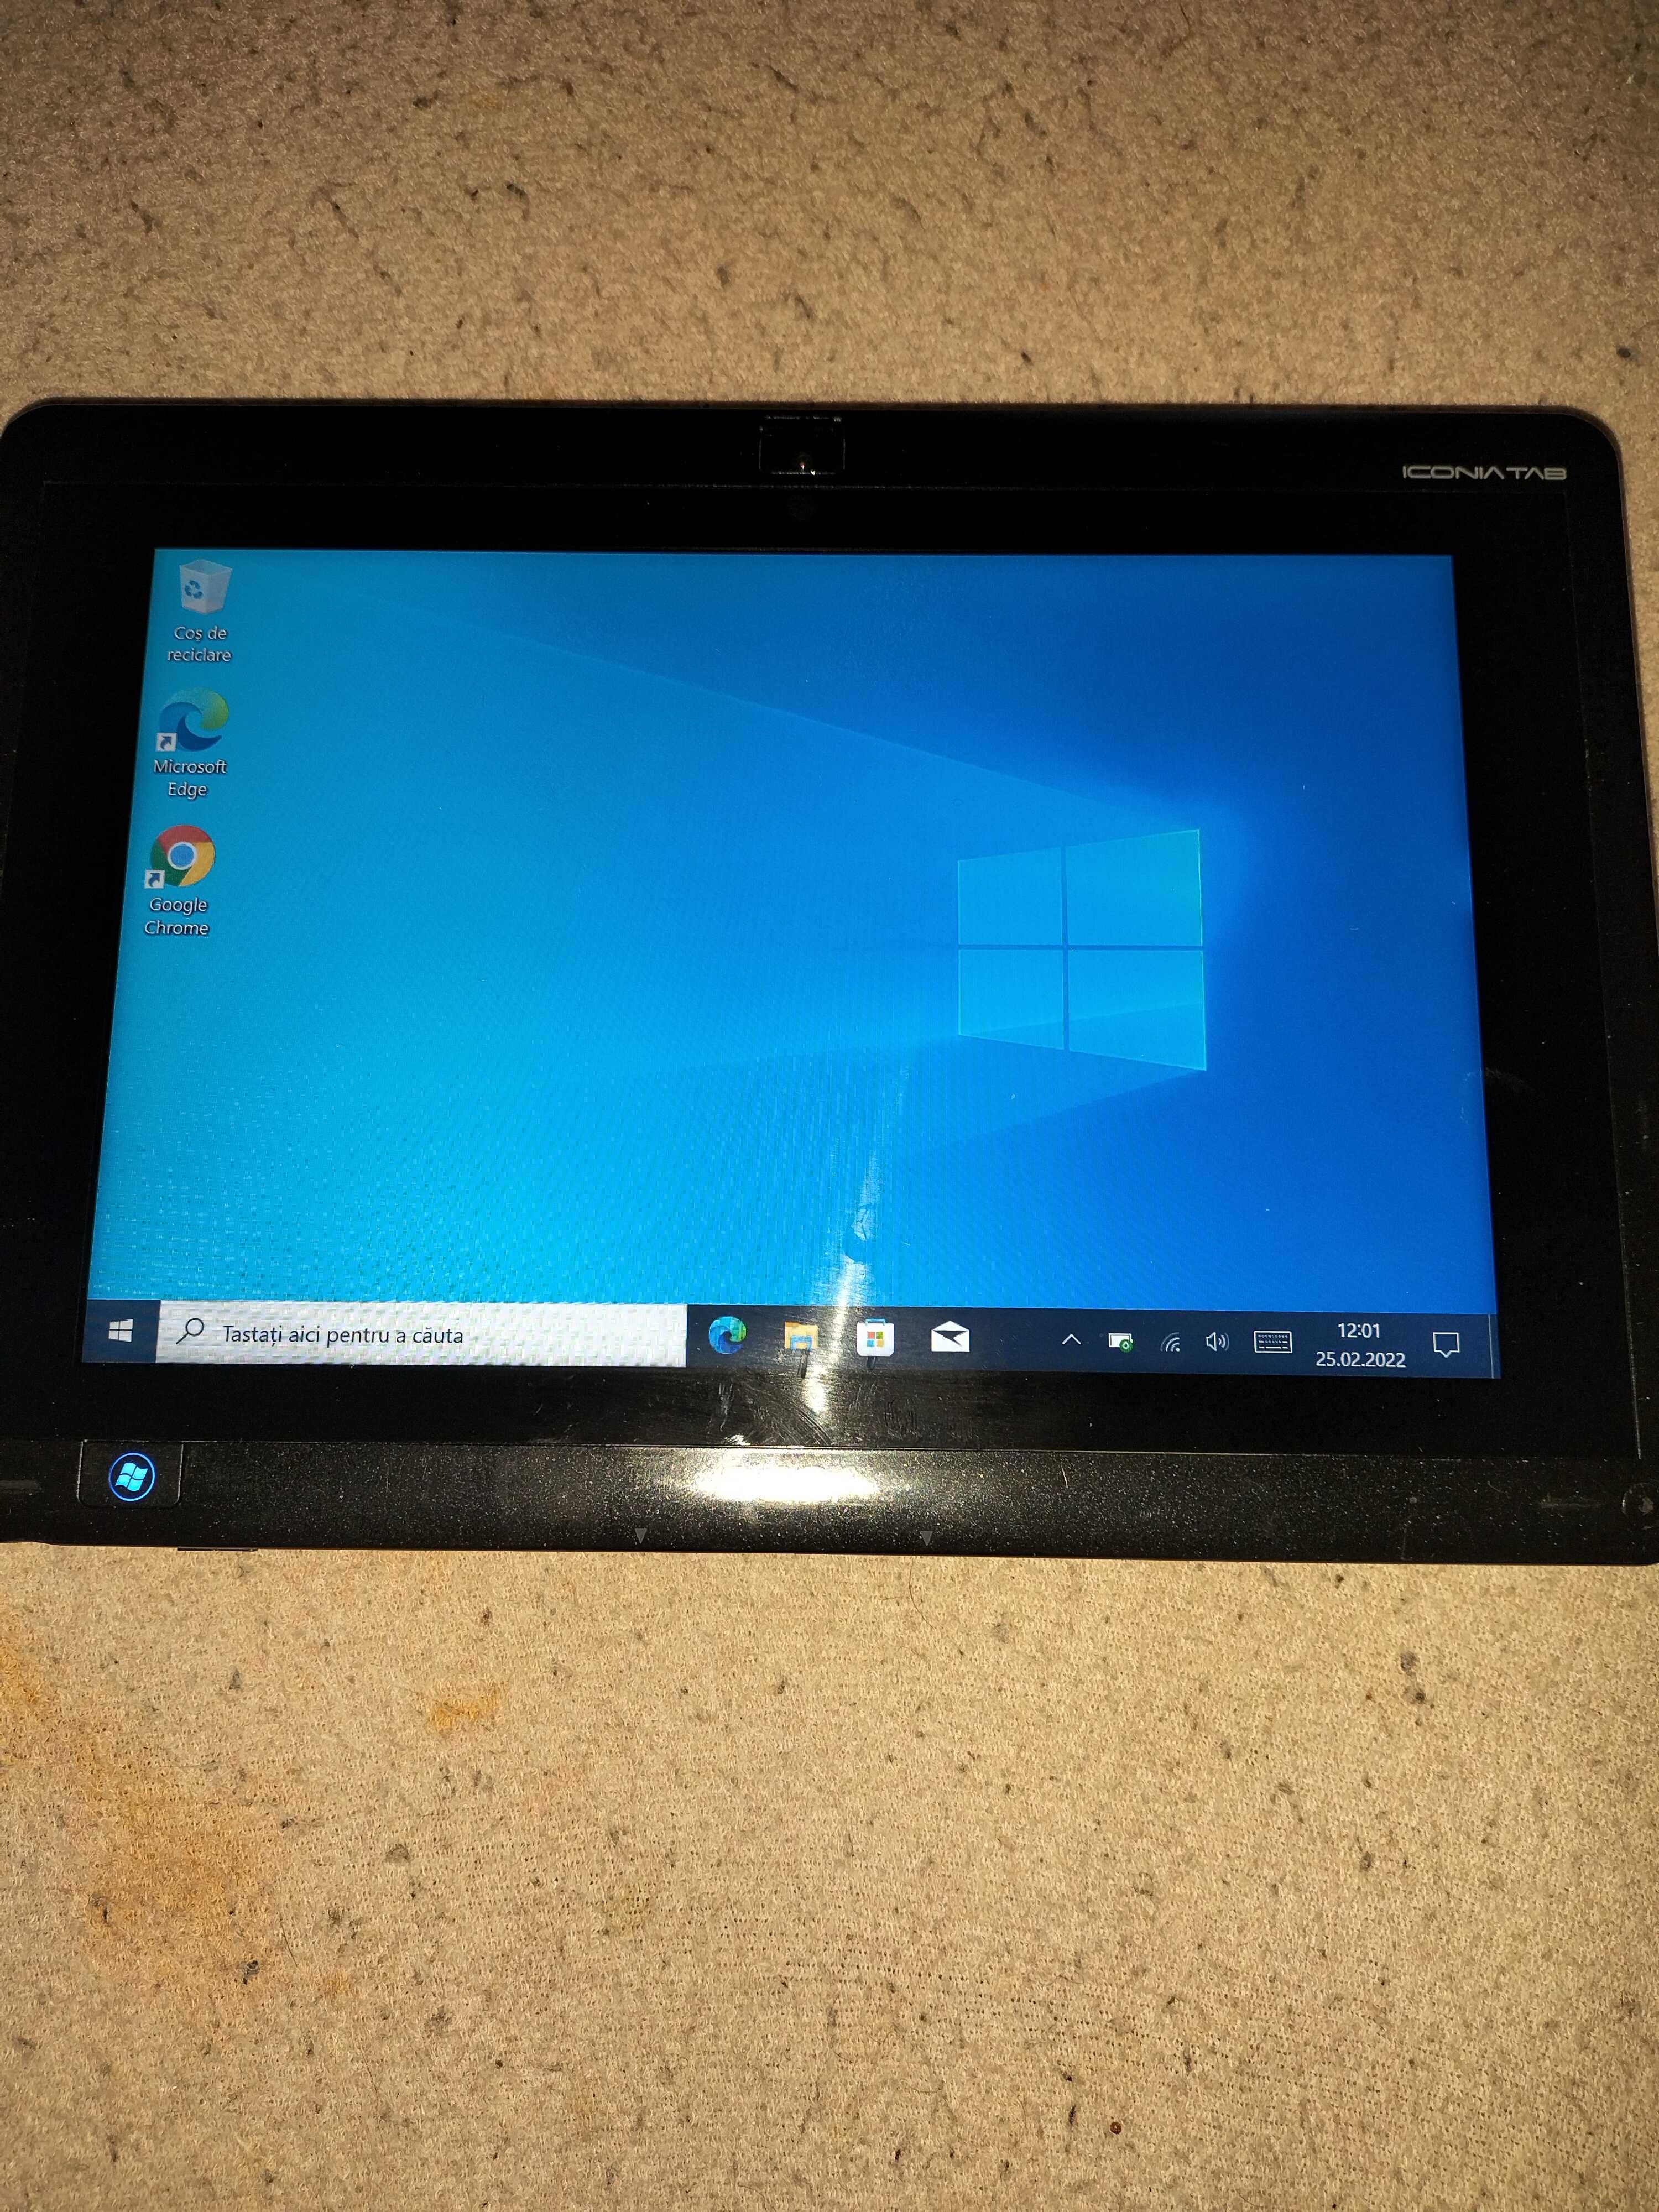 Vând tableta Acer iconia w500, tabletă HP all in one,